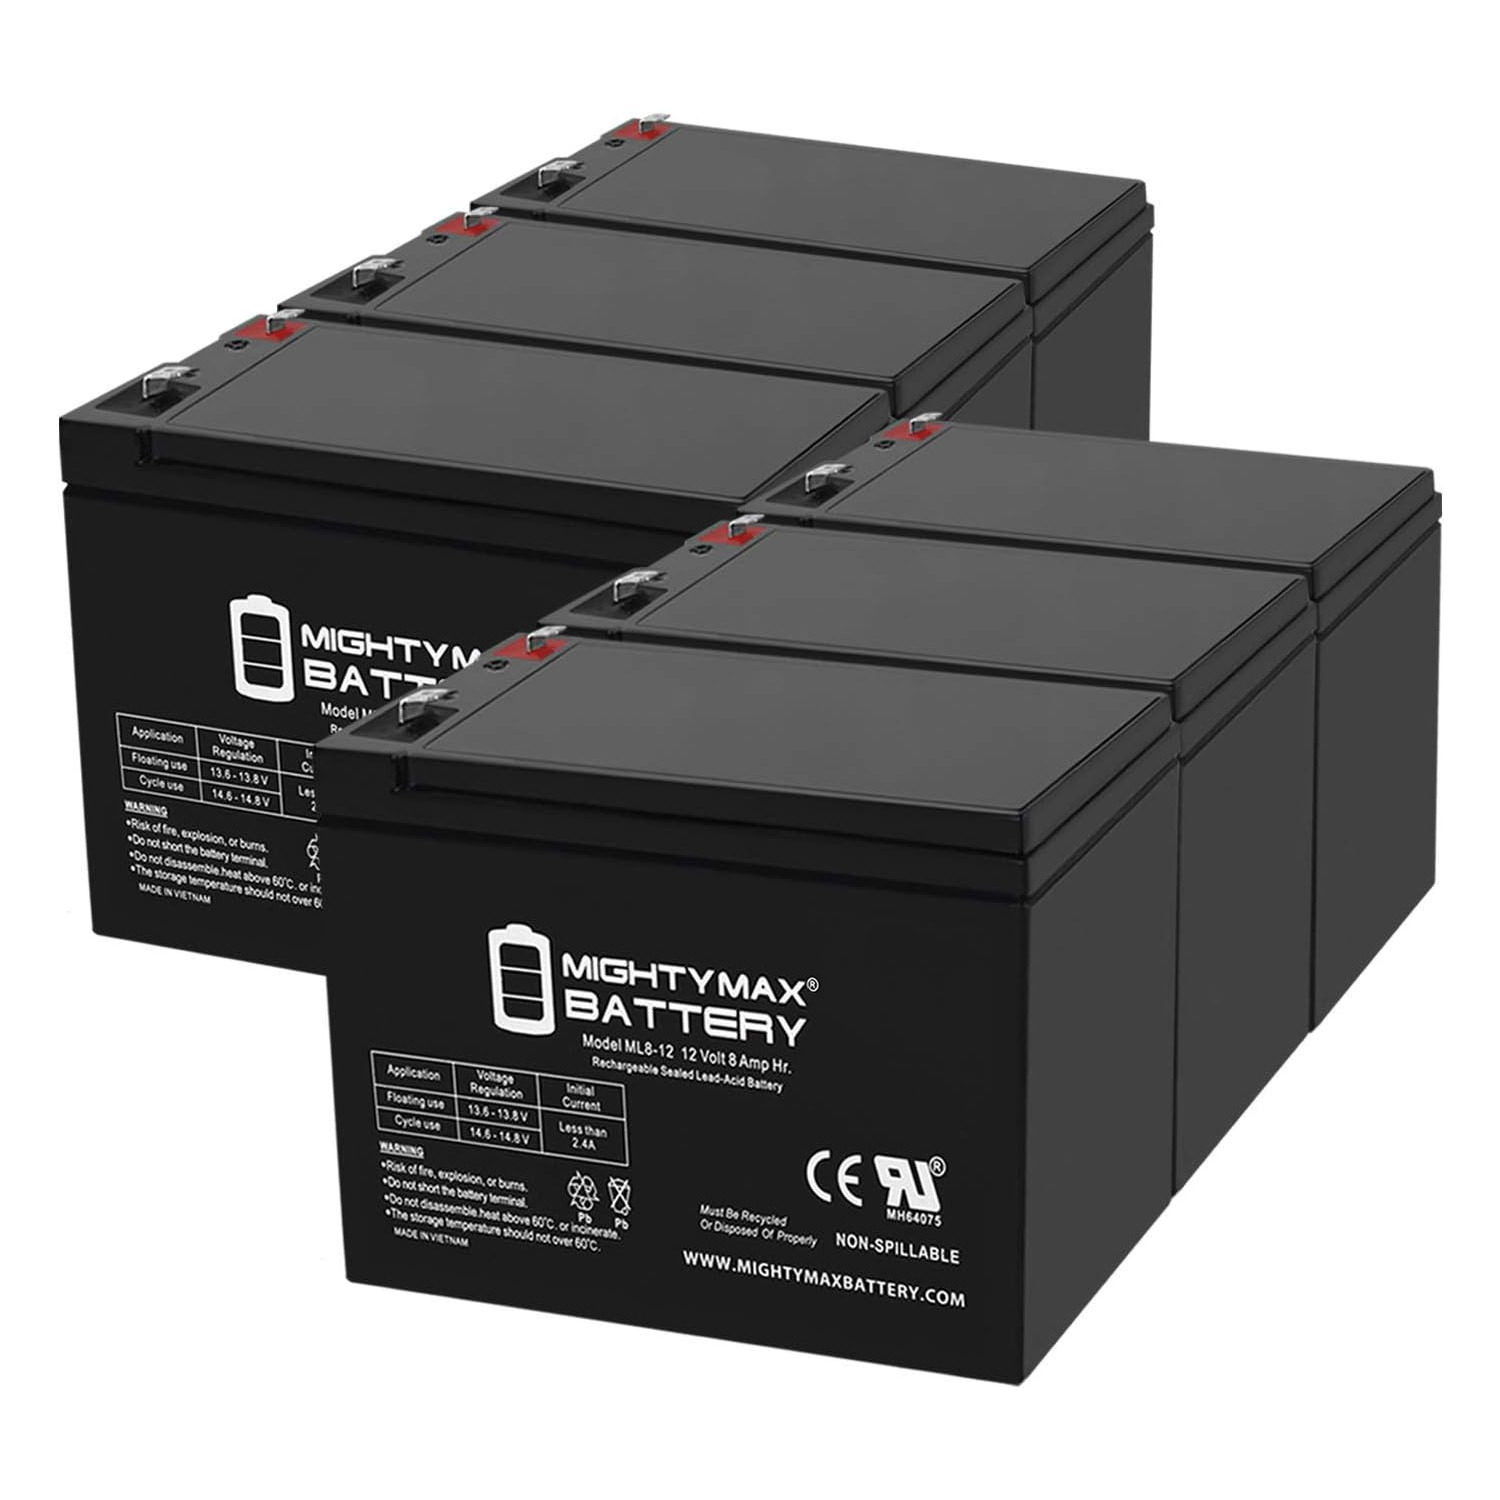 12V 8Ah SLA Replacement Battery for Compaq T700 - 6 Pack